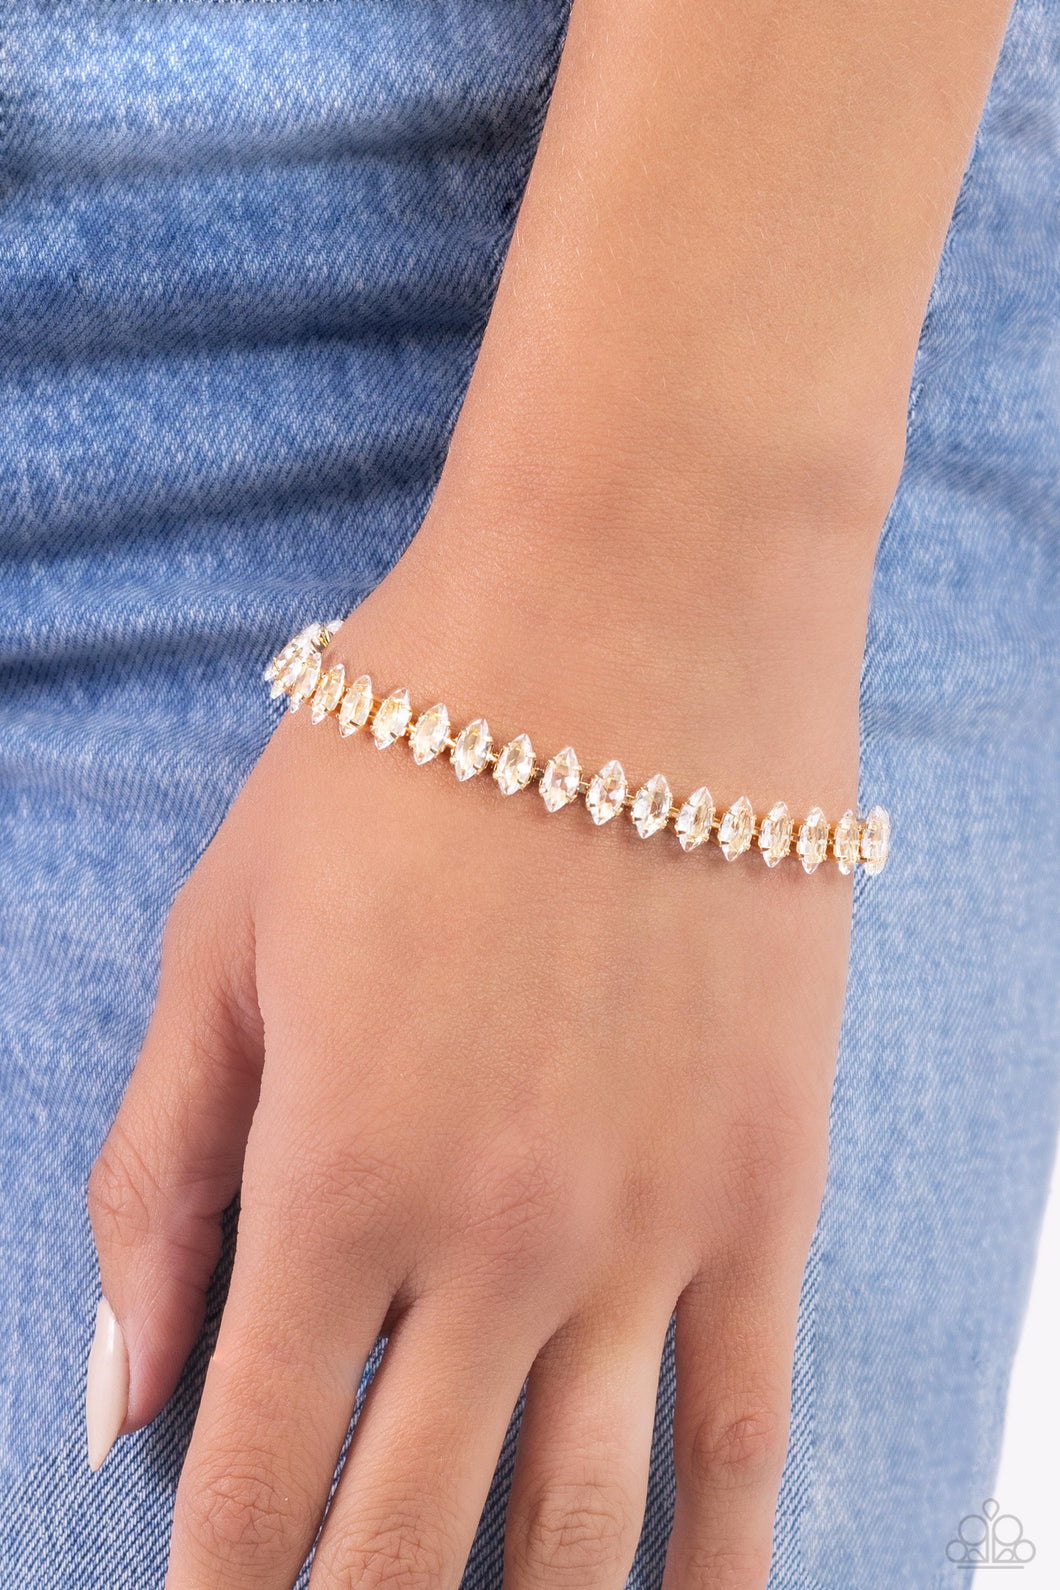 Featuring gold square fittings, crystal-like marquise-cut gems delicately link into a glamorous, refined centerpiece around the wrist. Features an adjustable clasp closure.  Sold as one individual bracelet